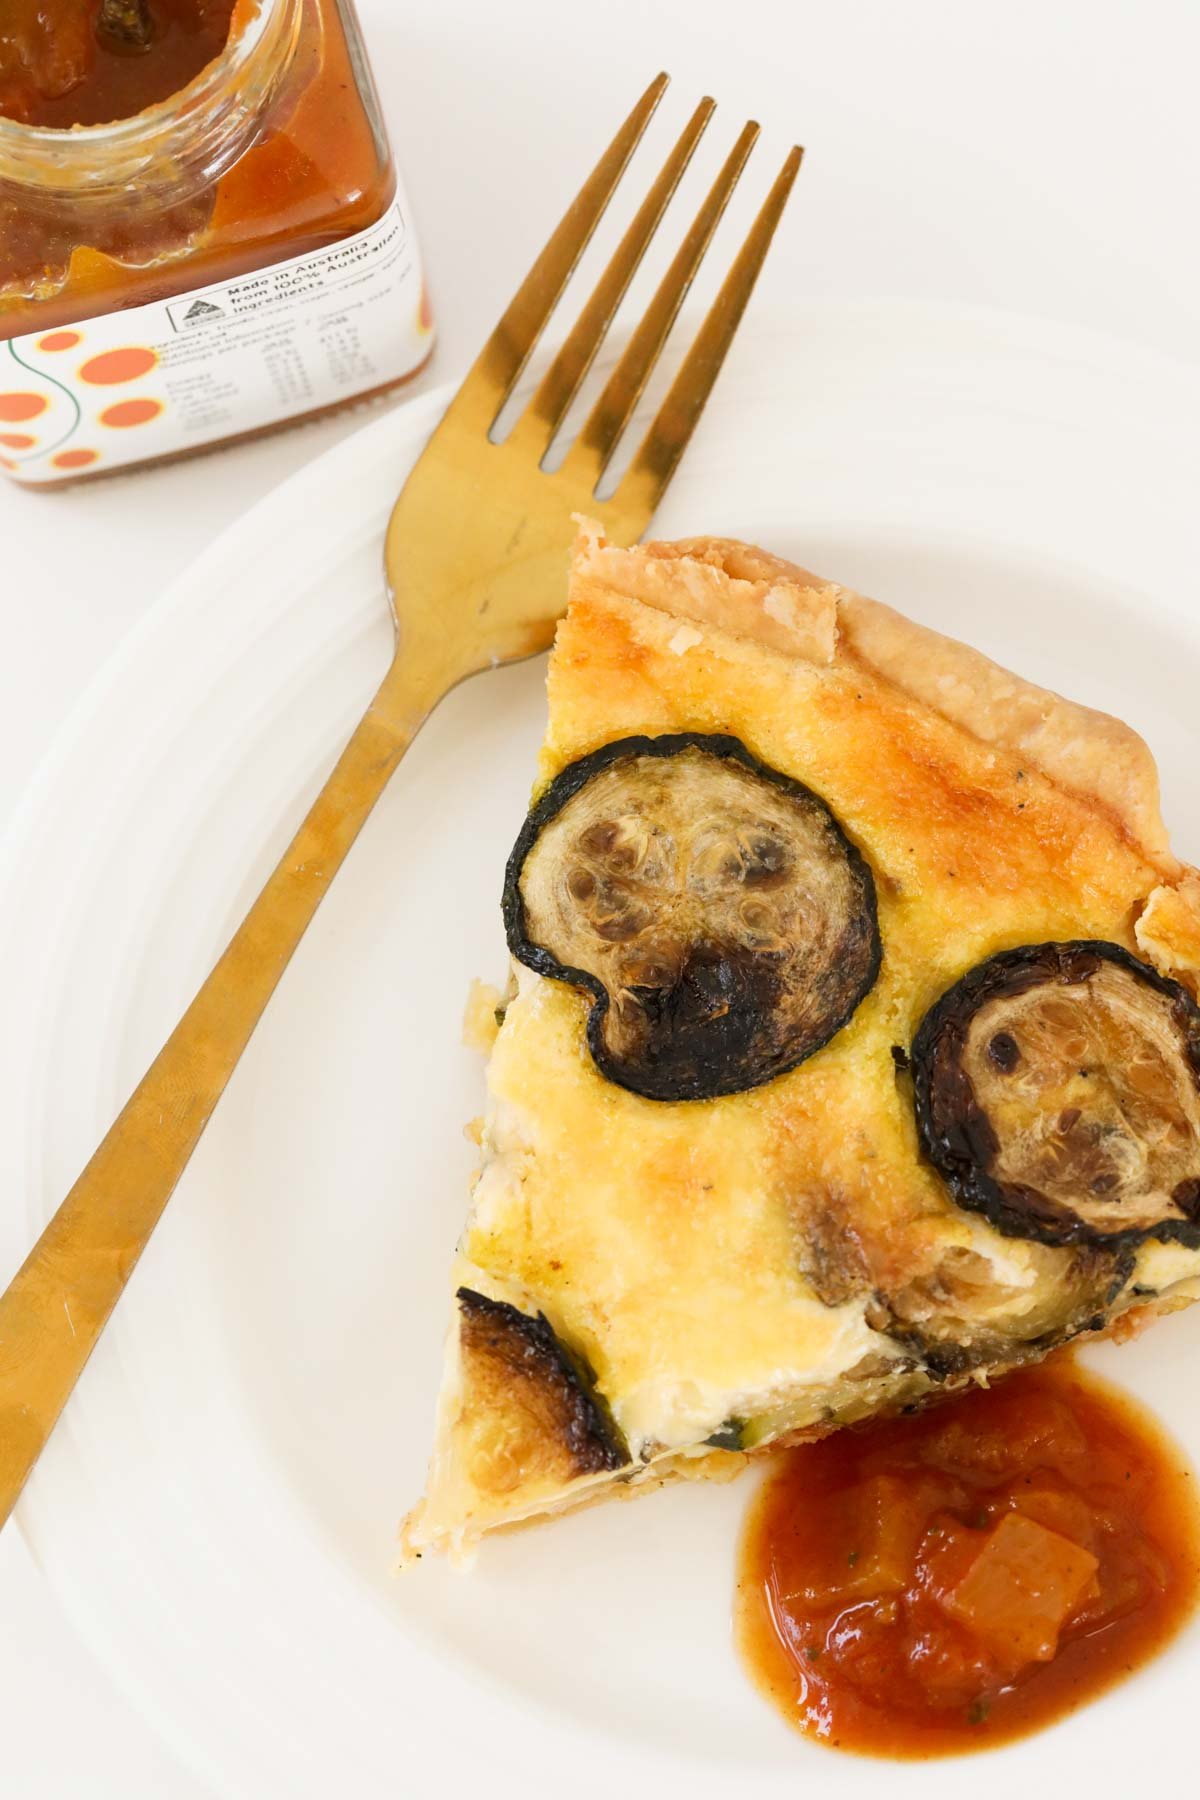 A slice of quiche with a fork on a plate.